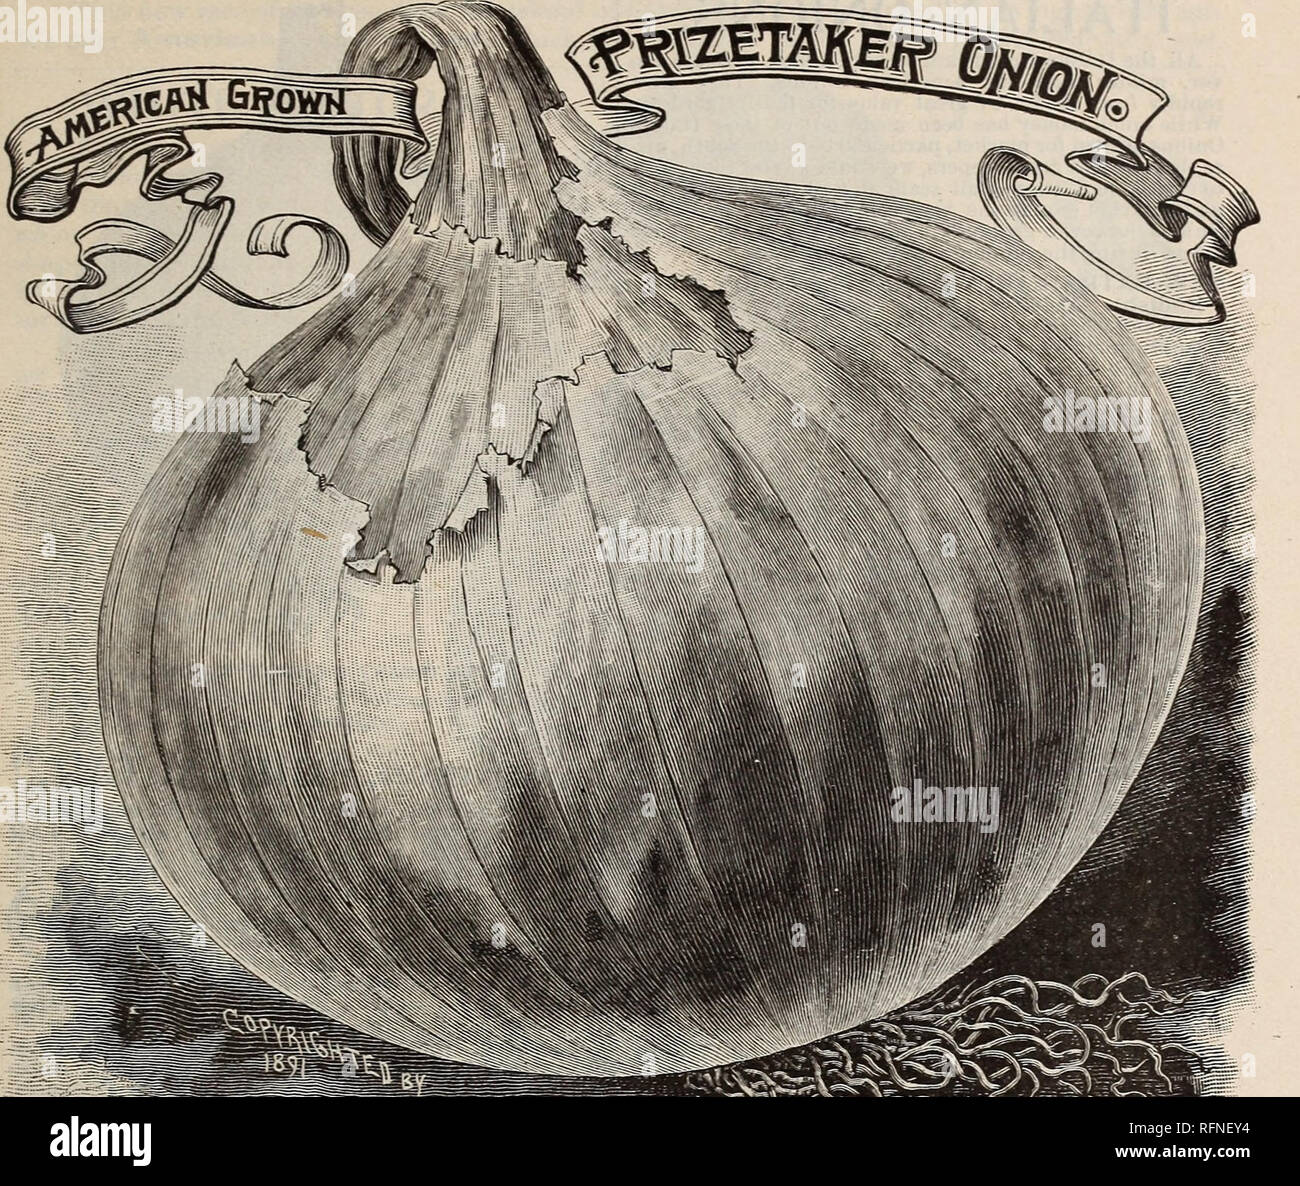 . Burpee's farm annual written at Fordhook Farm. Nurseries (Horticulture) Pennsylvania Philadelphia Catalogs; Vegetables Seeds Catalogs; Plants, Ornamental Catalogs; Flowers Seeds Catalogs. AMERICAN ONION SEED. 57. THE PRIZE=TAKER ONION. The Ameeican-Geown Peize-Takee Onion grows uniform in shape, of a nearly perfect globe, as shown in the illustration, with thin skin of bright straw-color ; it is of immense size, measuring from twelve to eighteen inches in circumference, while under special cultivation specimen bulbs have been raised to weigh from four to five and a half pounds each. It ripen Stock Photo